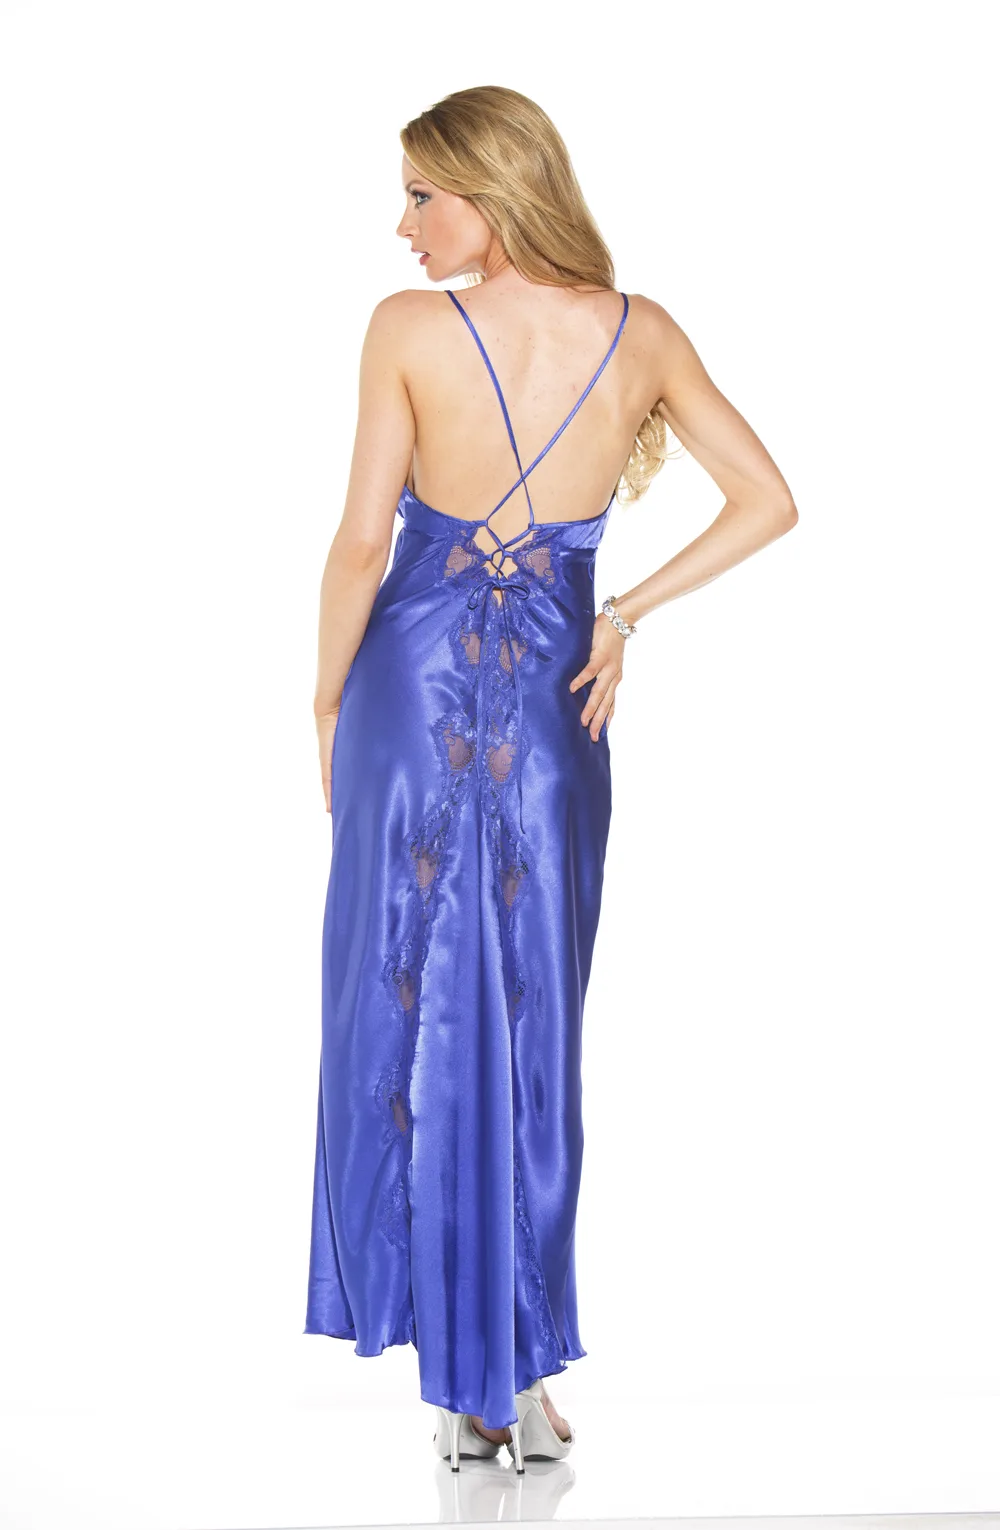 image 2 of Shirley of Hollywood Blue Lace Long Gown (20300) for Nightwear Glamor